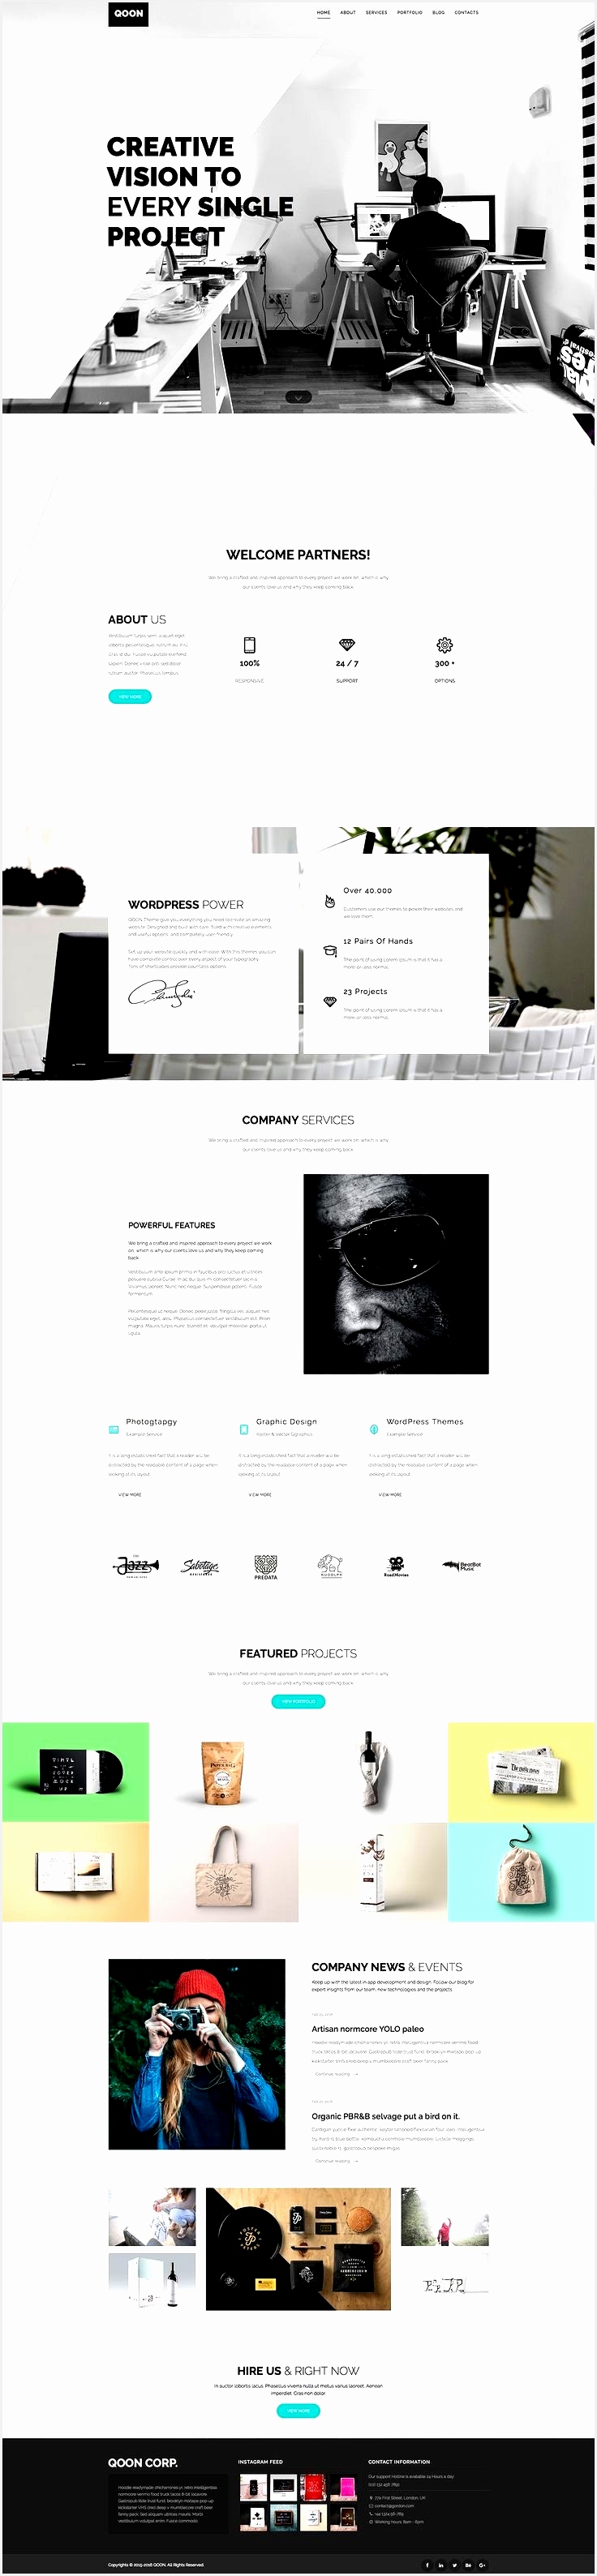 Resume Templates Free Download New Pr Resume Template Elegant Dictionary Template 0d Archives Free3177736